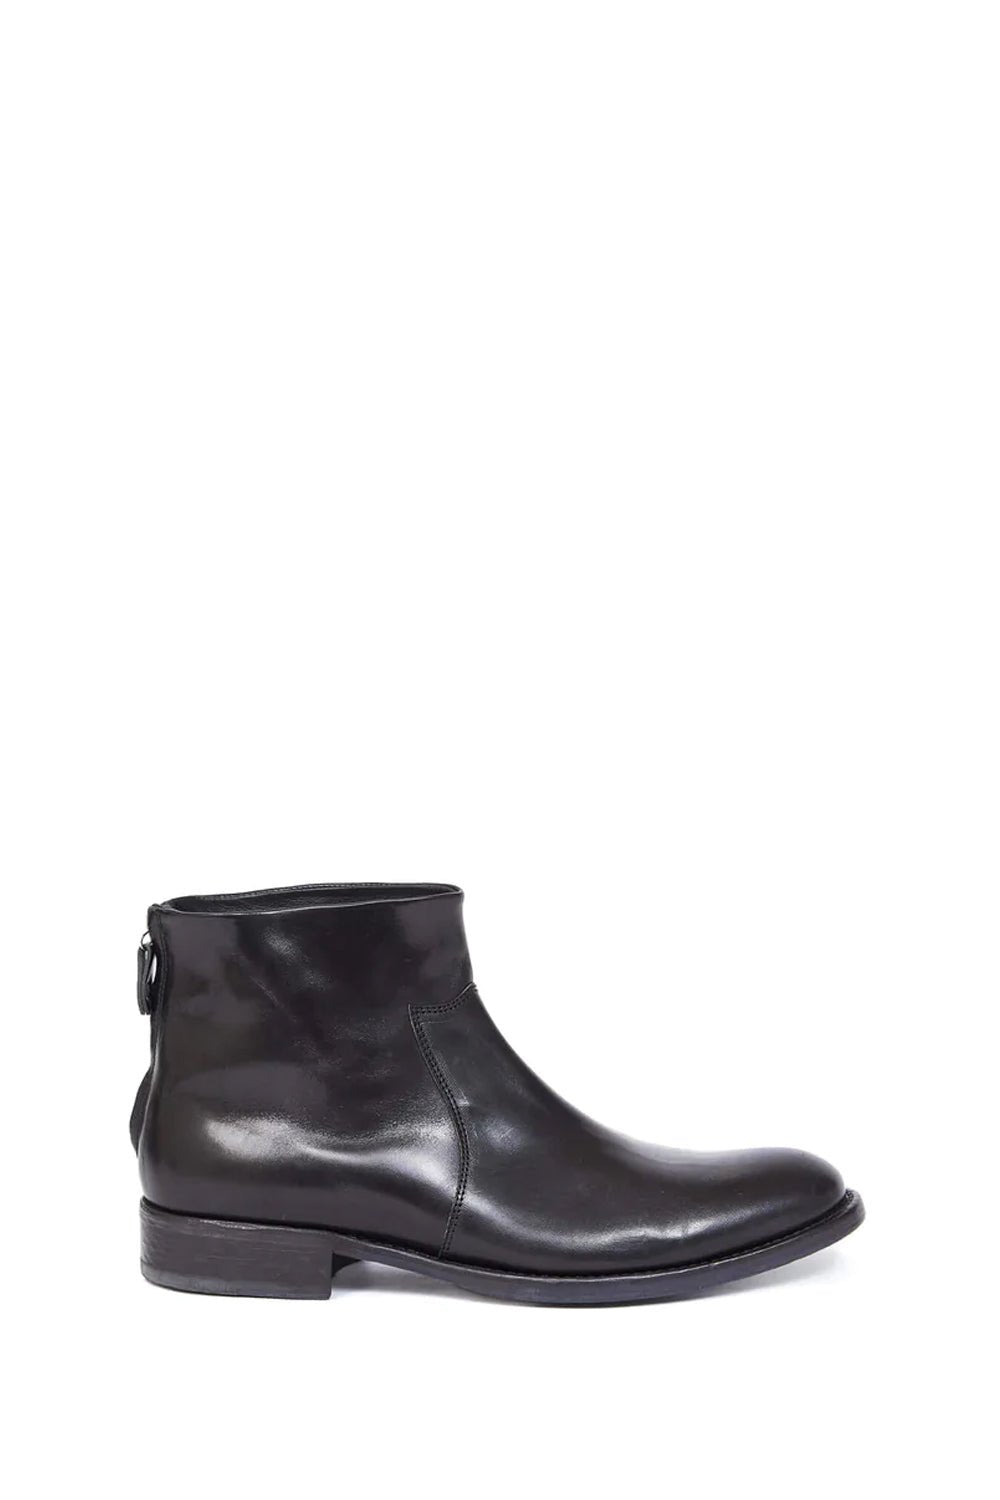 OFFICER ZIP BOOT Black leather boots, leather sole, side zip closure. made in Italy. HTC LOS ANGELES